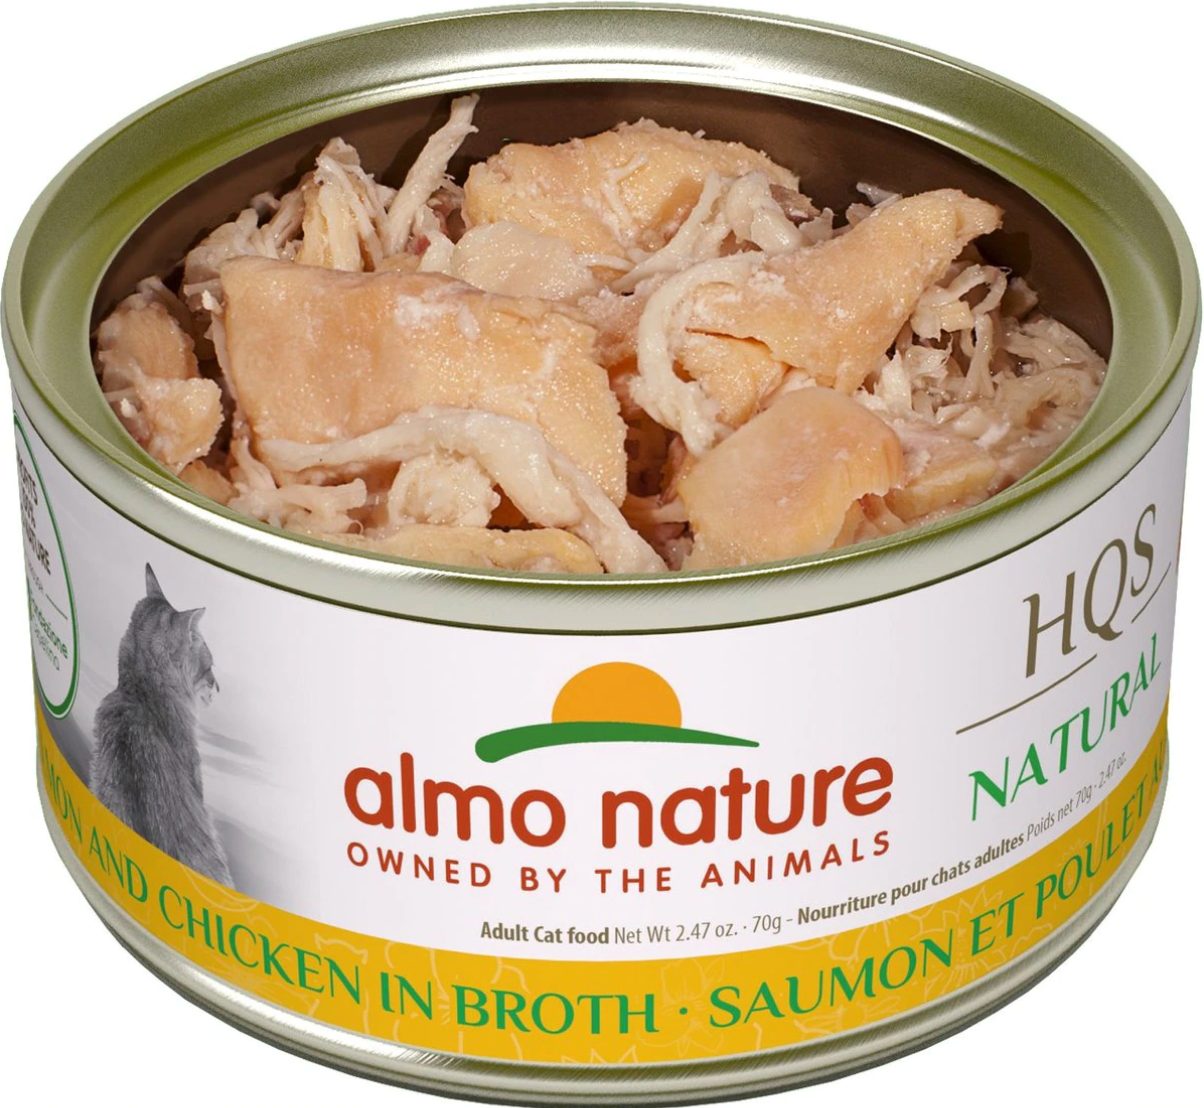 Almo Nature Daily HQS Salmon With Chicken in Broth Canned Cat Food, 2.47 oz.